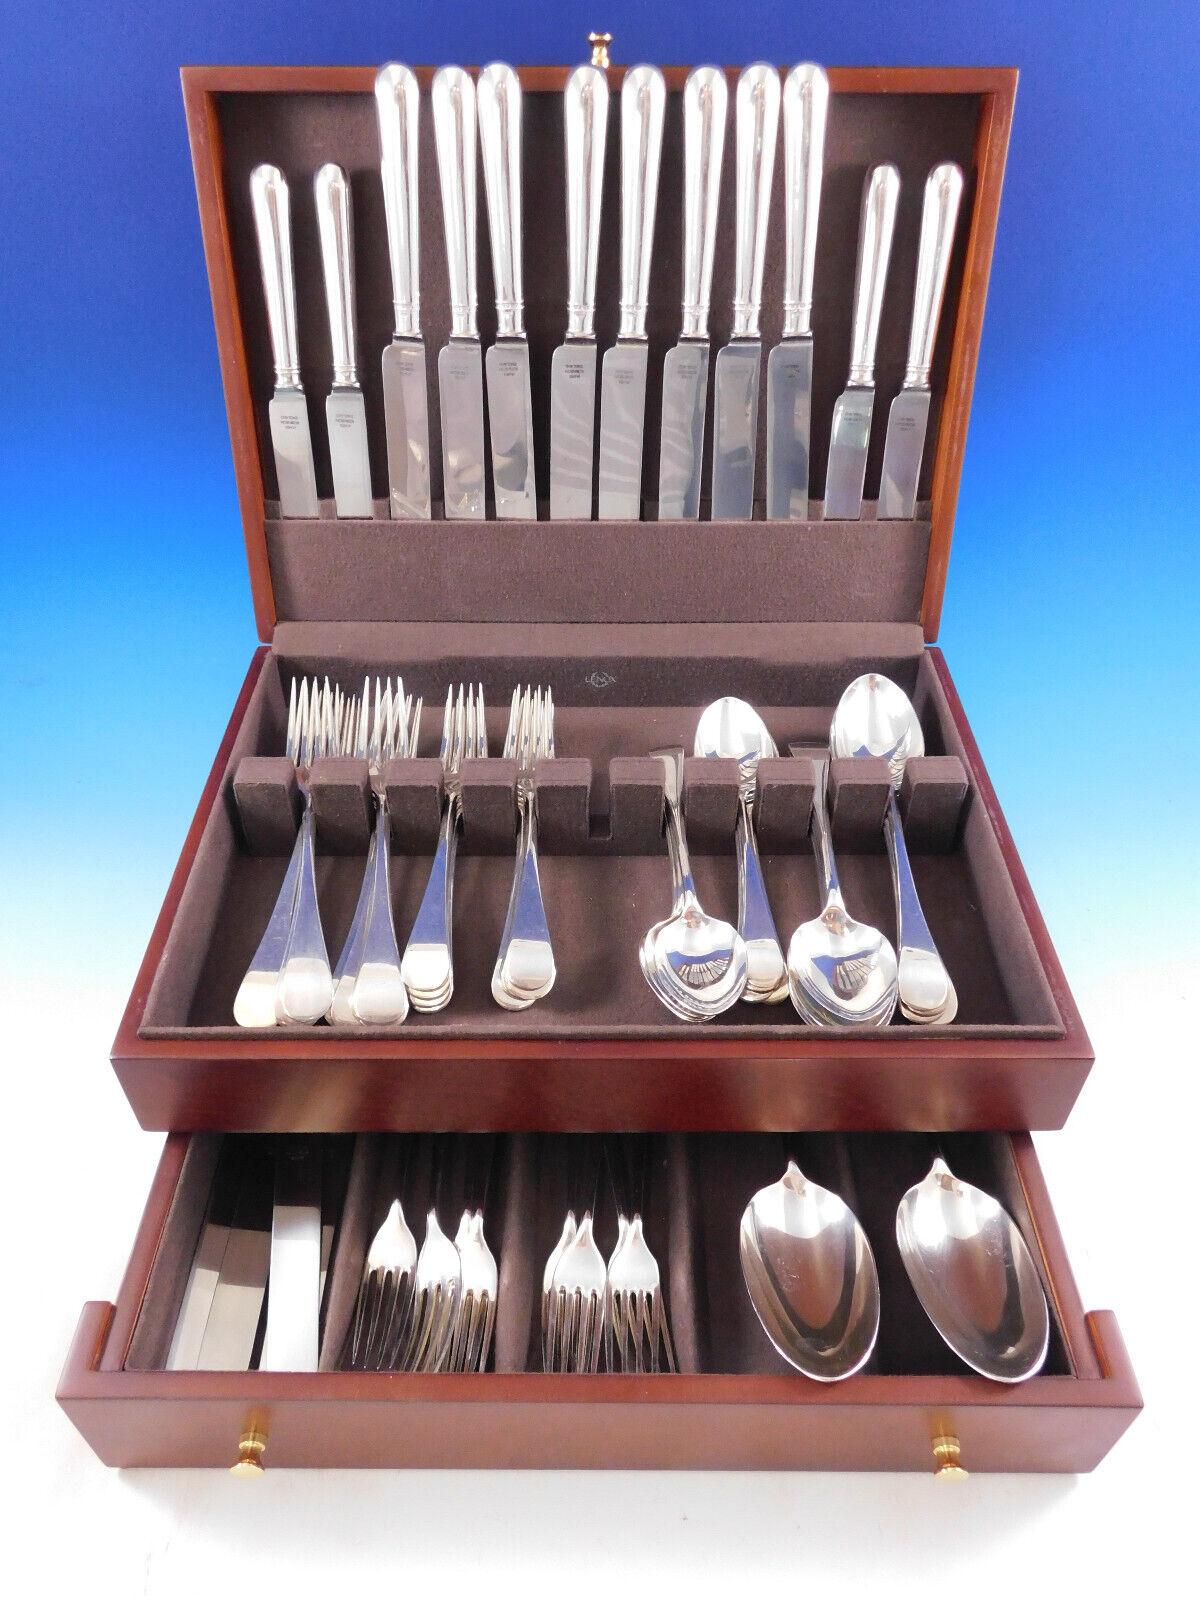 Irish rib BY JAMES ROBINSON

For 70 years, James Robinson has been selling exquisite handmade sterling silver flatware in Sheffield, England. Today, the silver is still made in the traditional way. They start with a rectangular strip of silver,